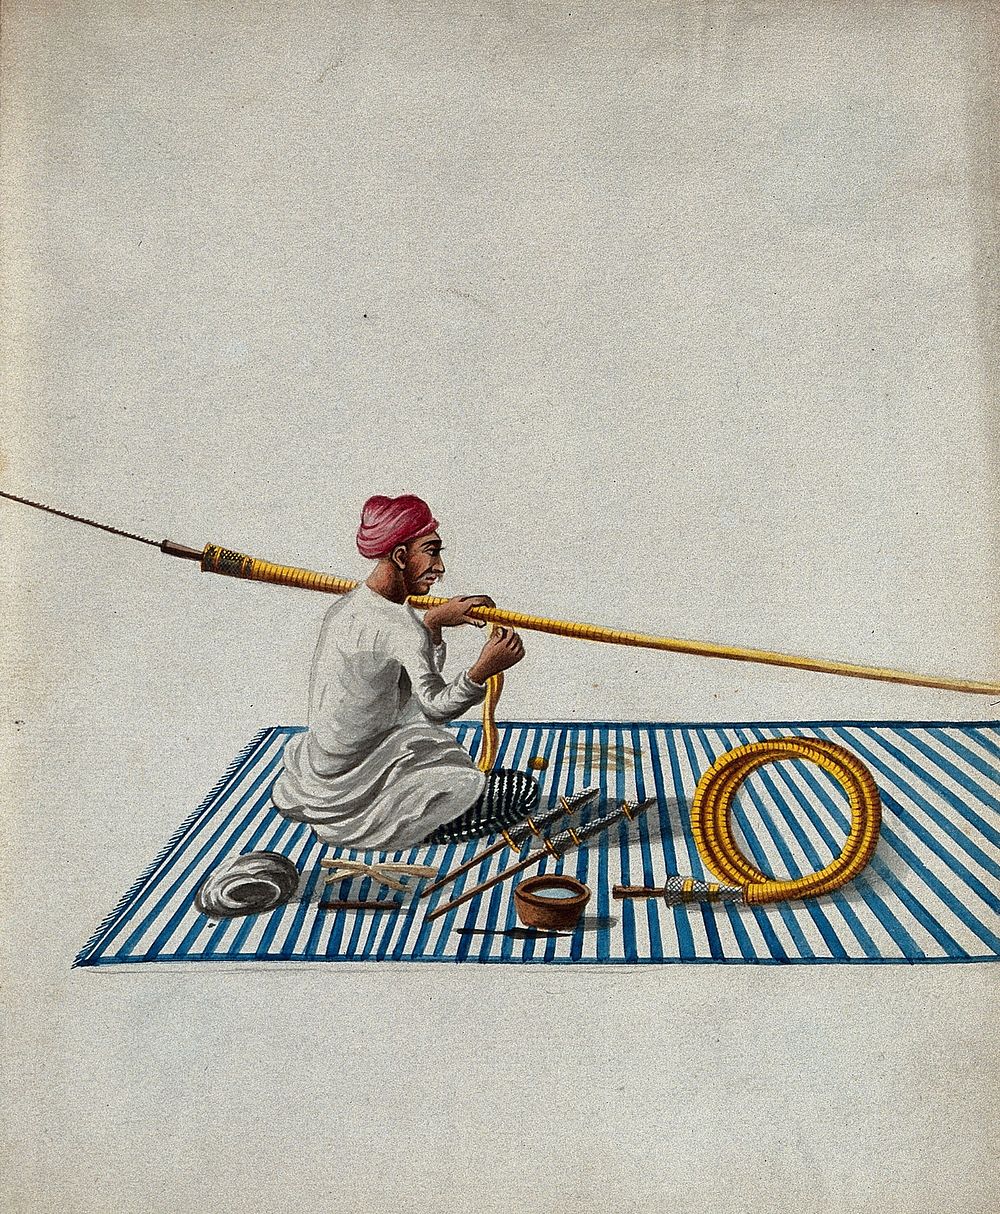 A man sitting on a carpet making hookah pipes. Gouache painting by an Indian artist.